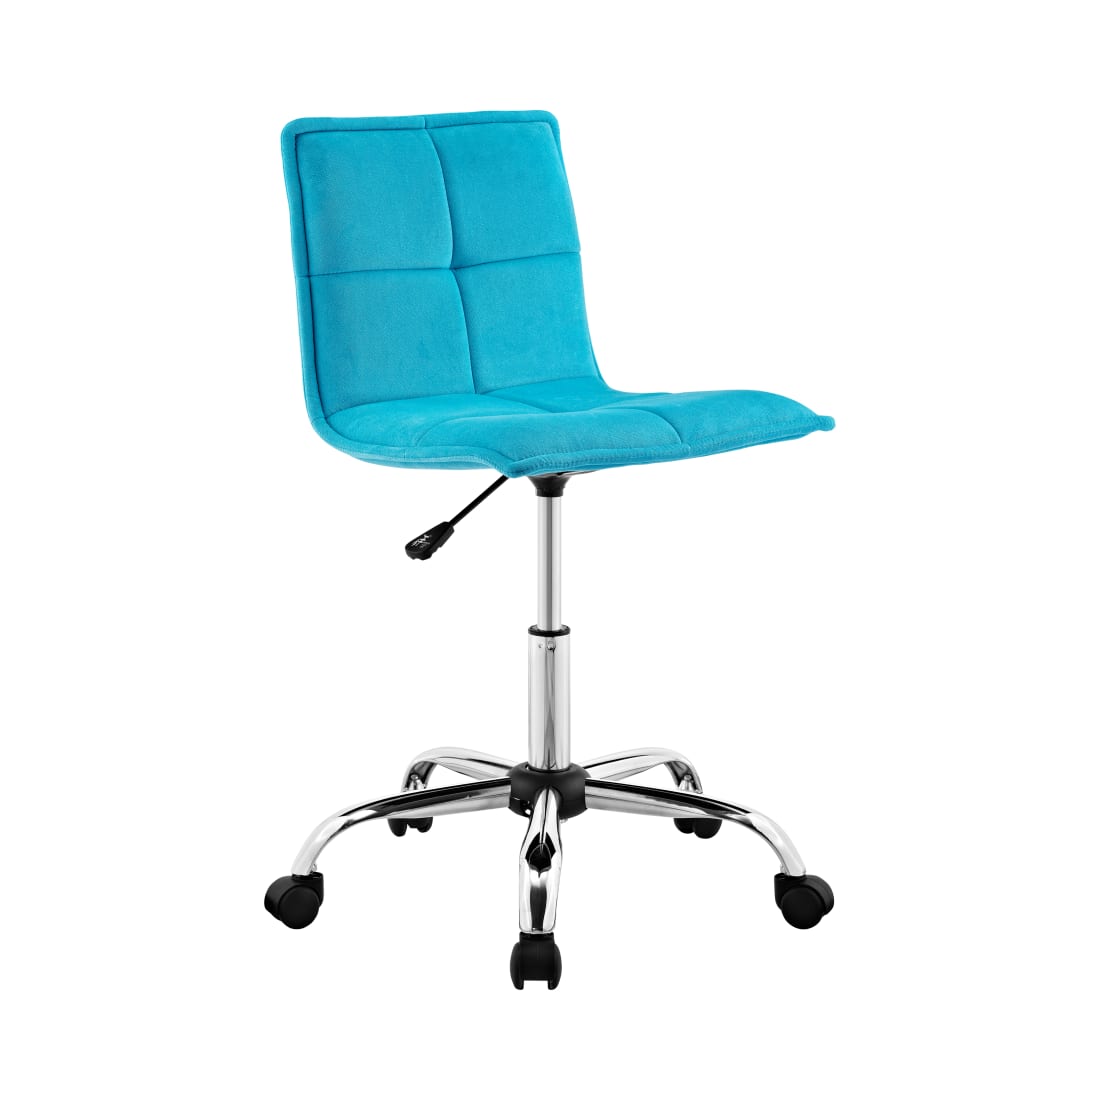 Hough Collection Teal  Chair